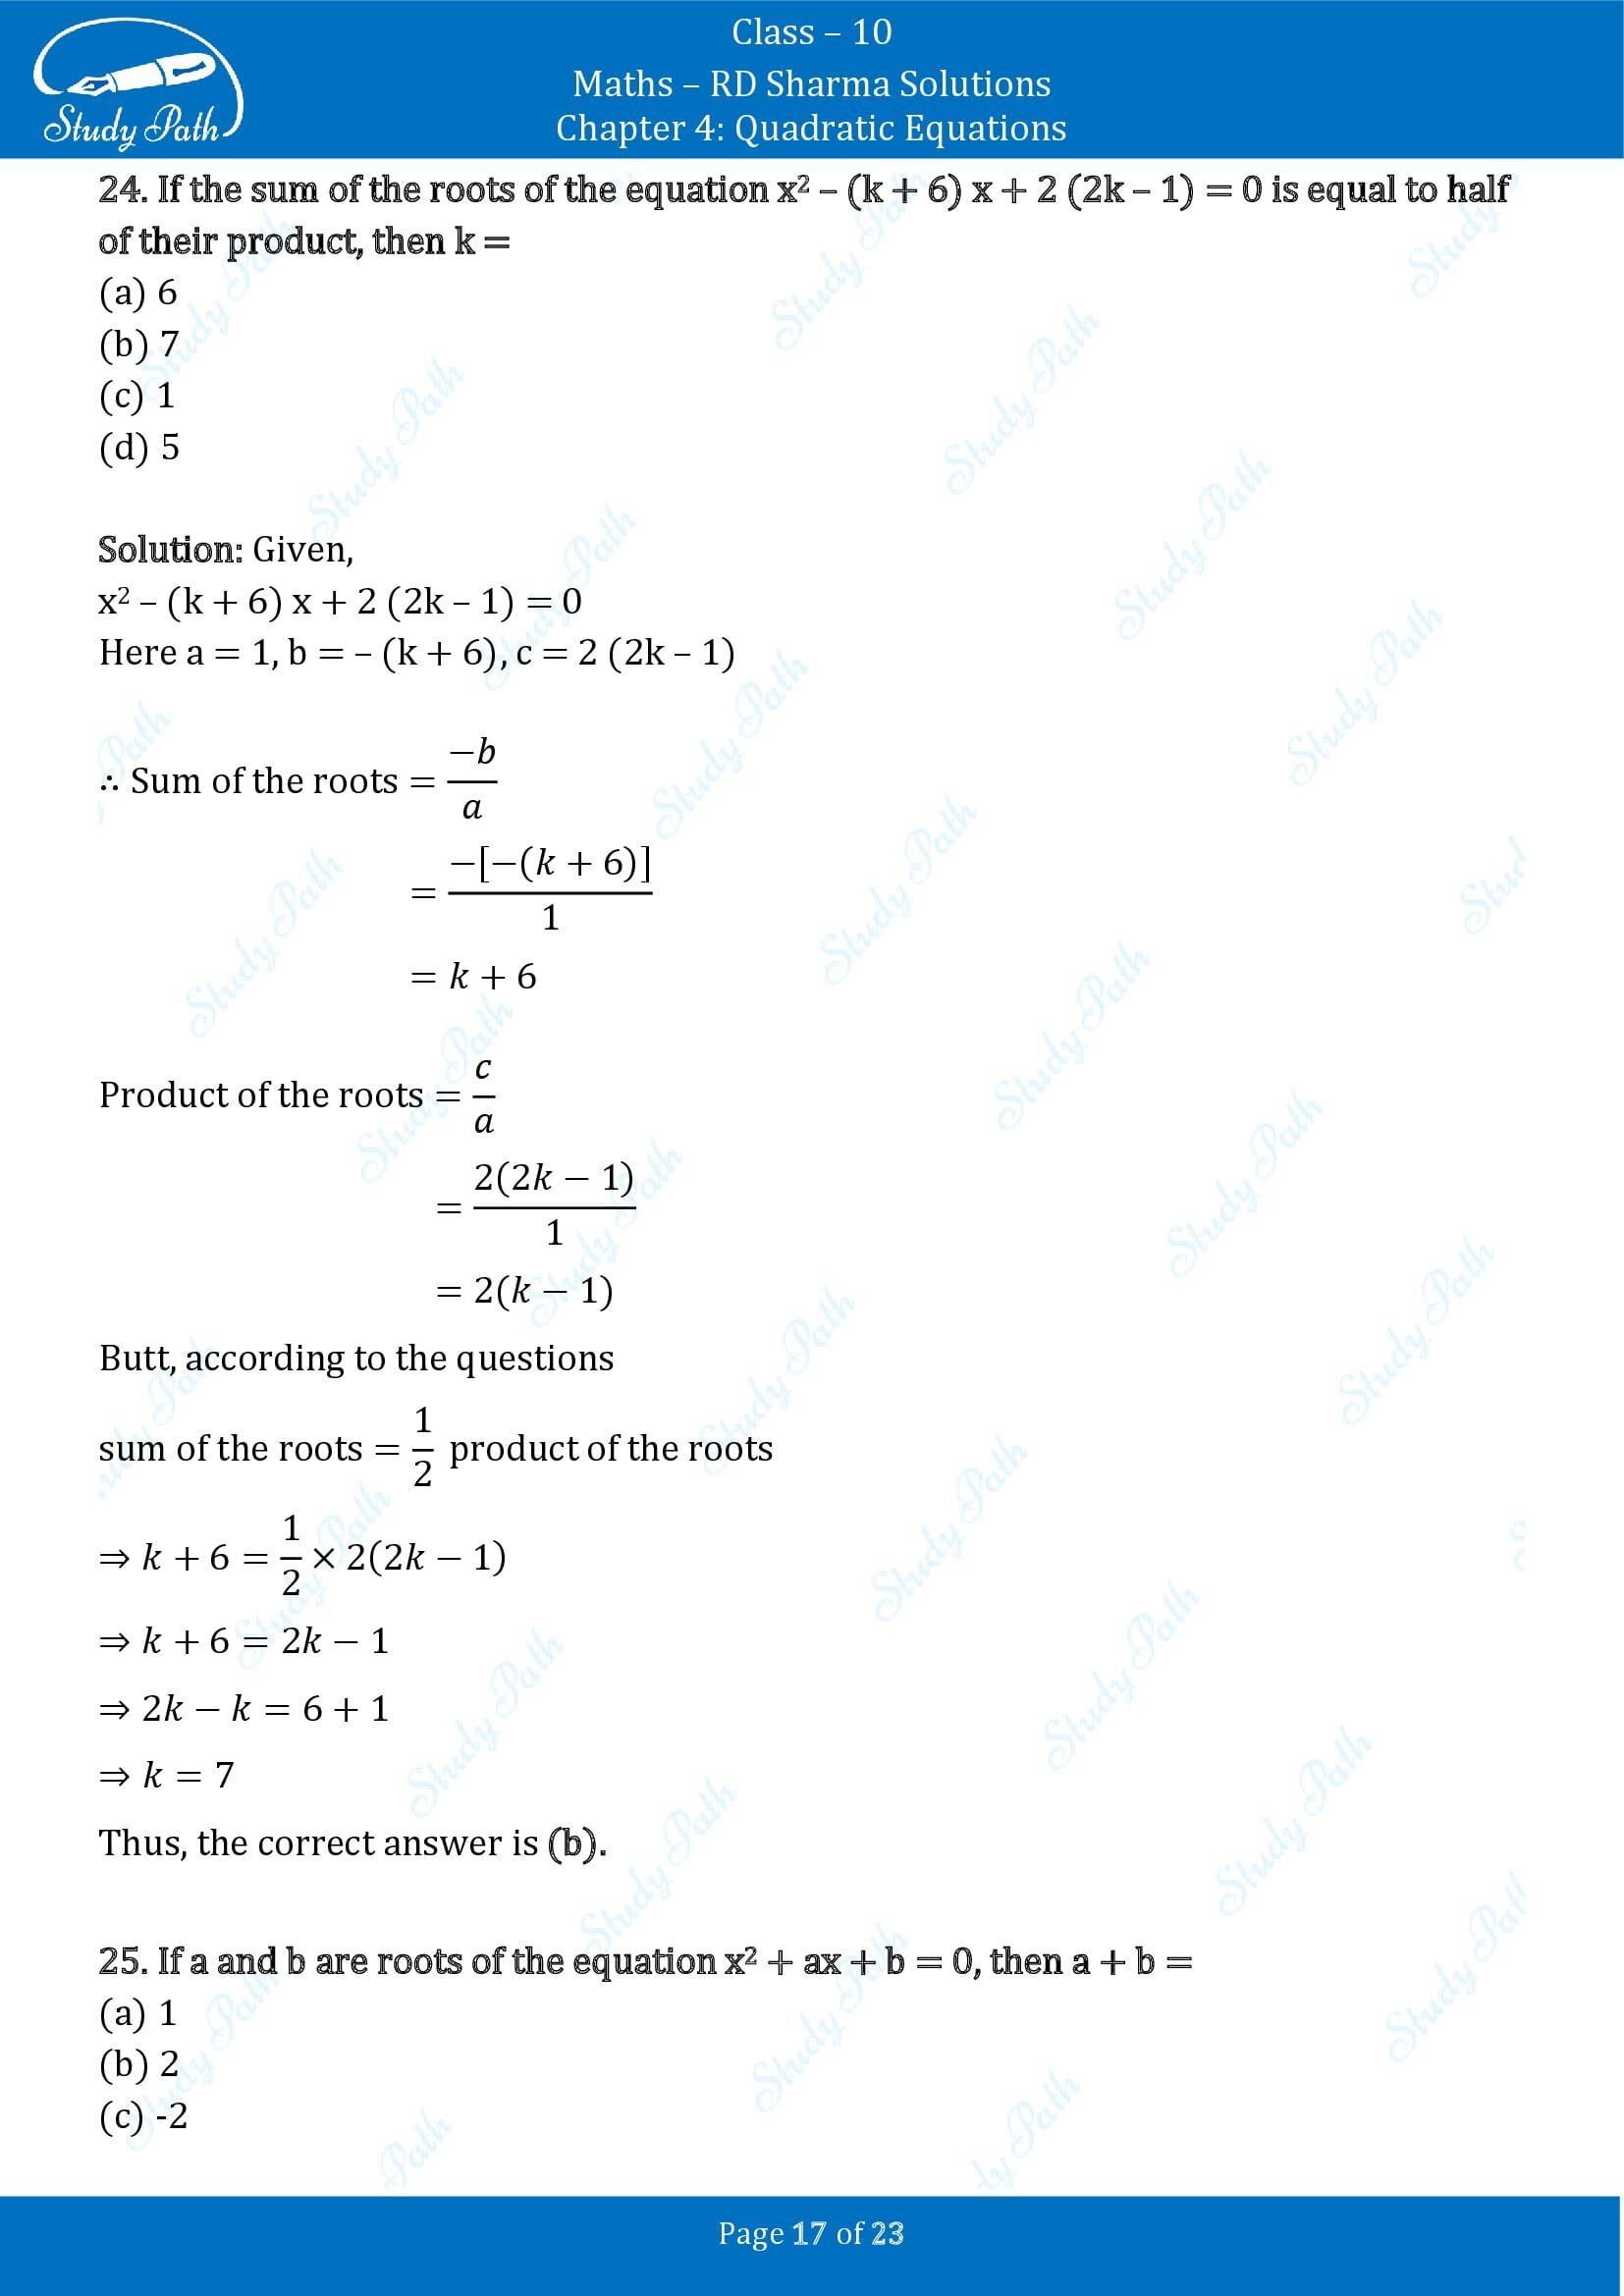 RD Sharma Solutions Class 10 Chapter 4 Quadratic Equations Multiple Choice Questions MCQs 00017